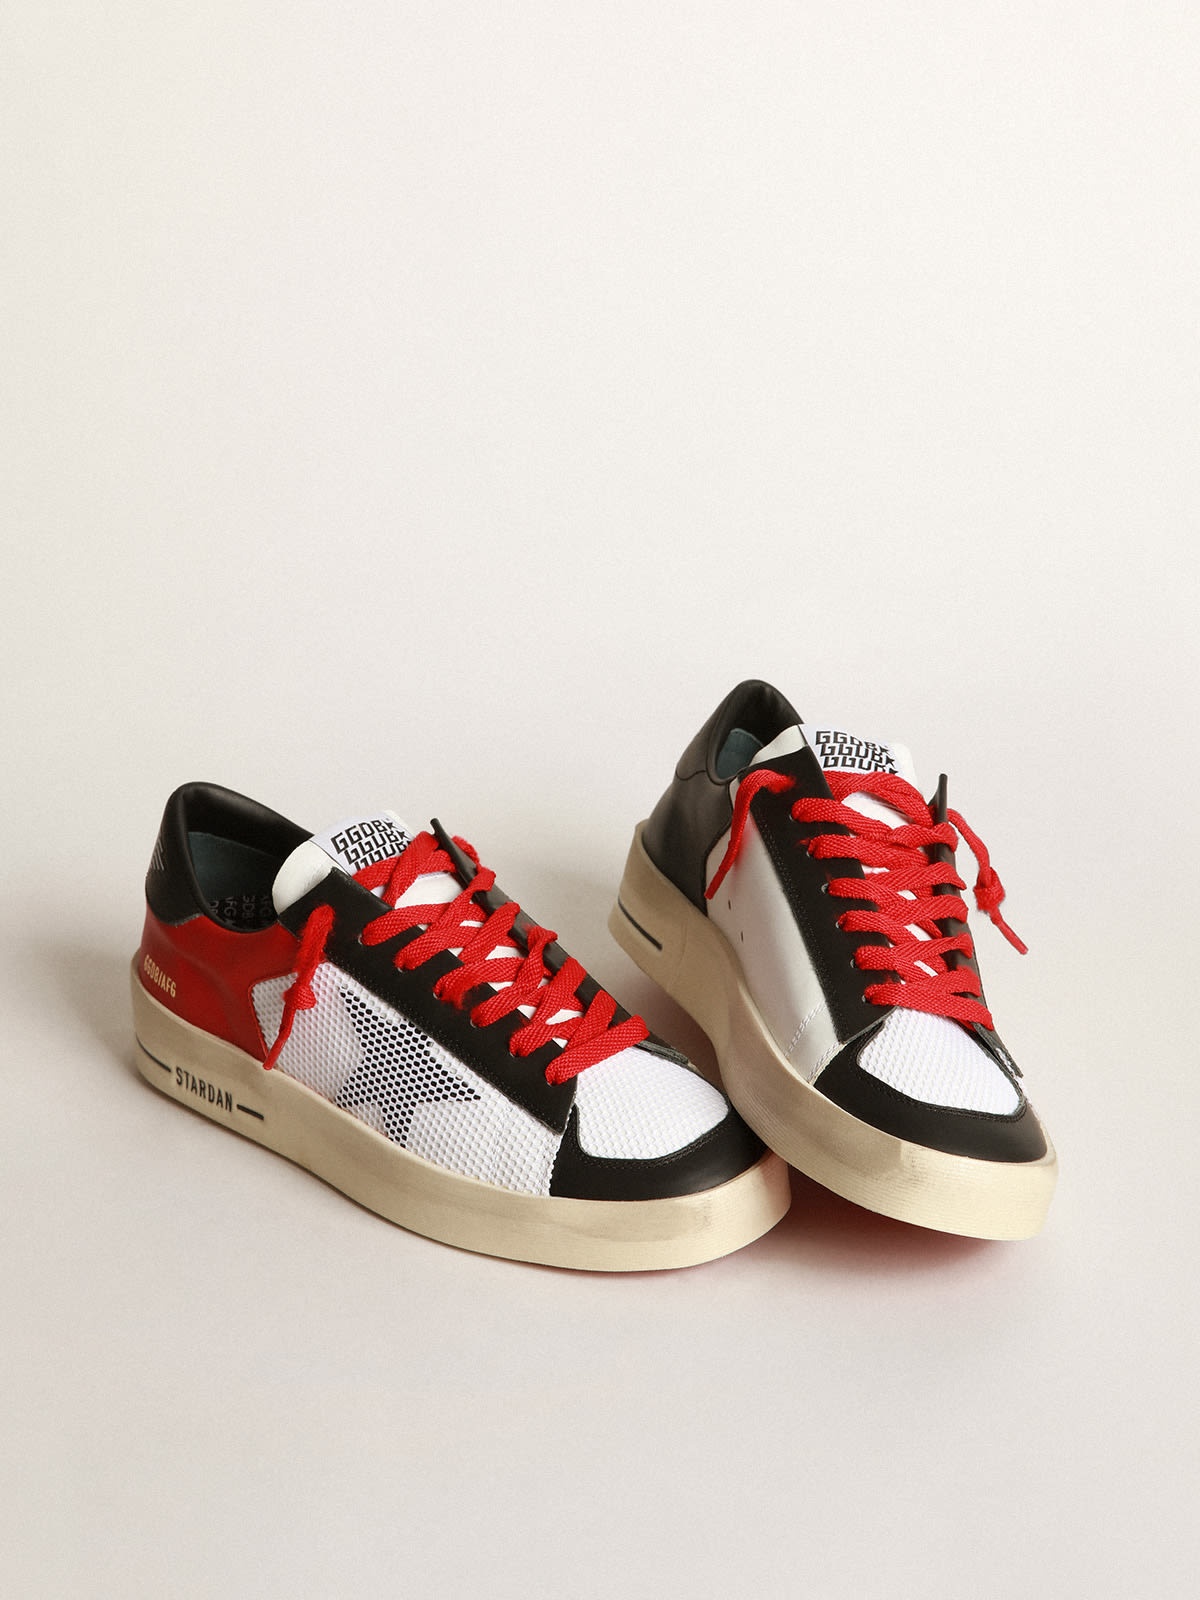 Stardan sneakers in red and white leather with mesh inserts - 2